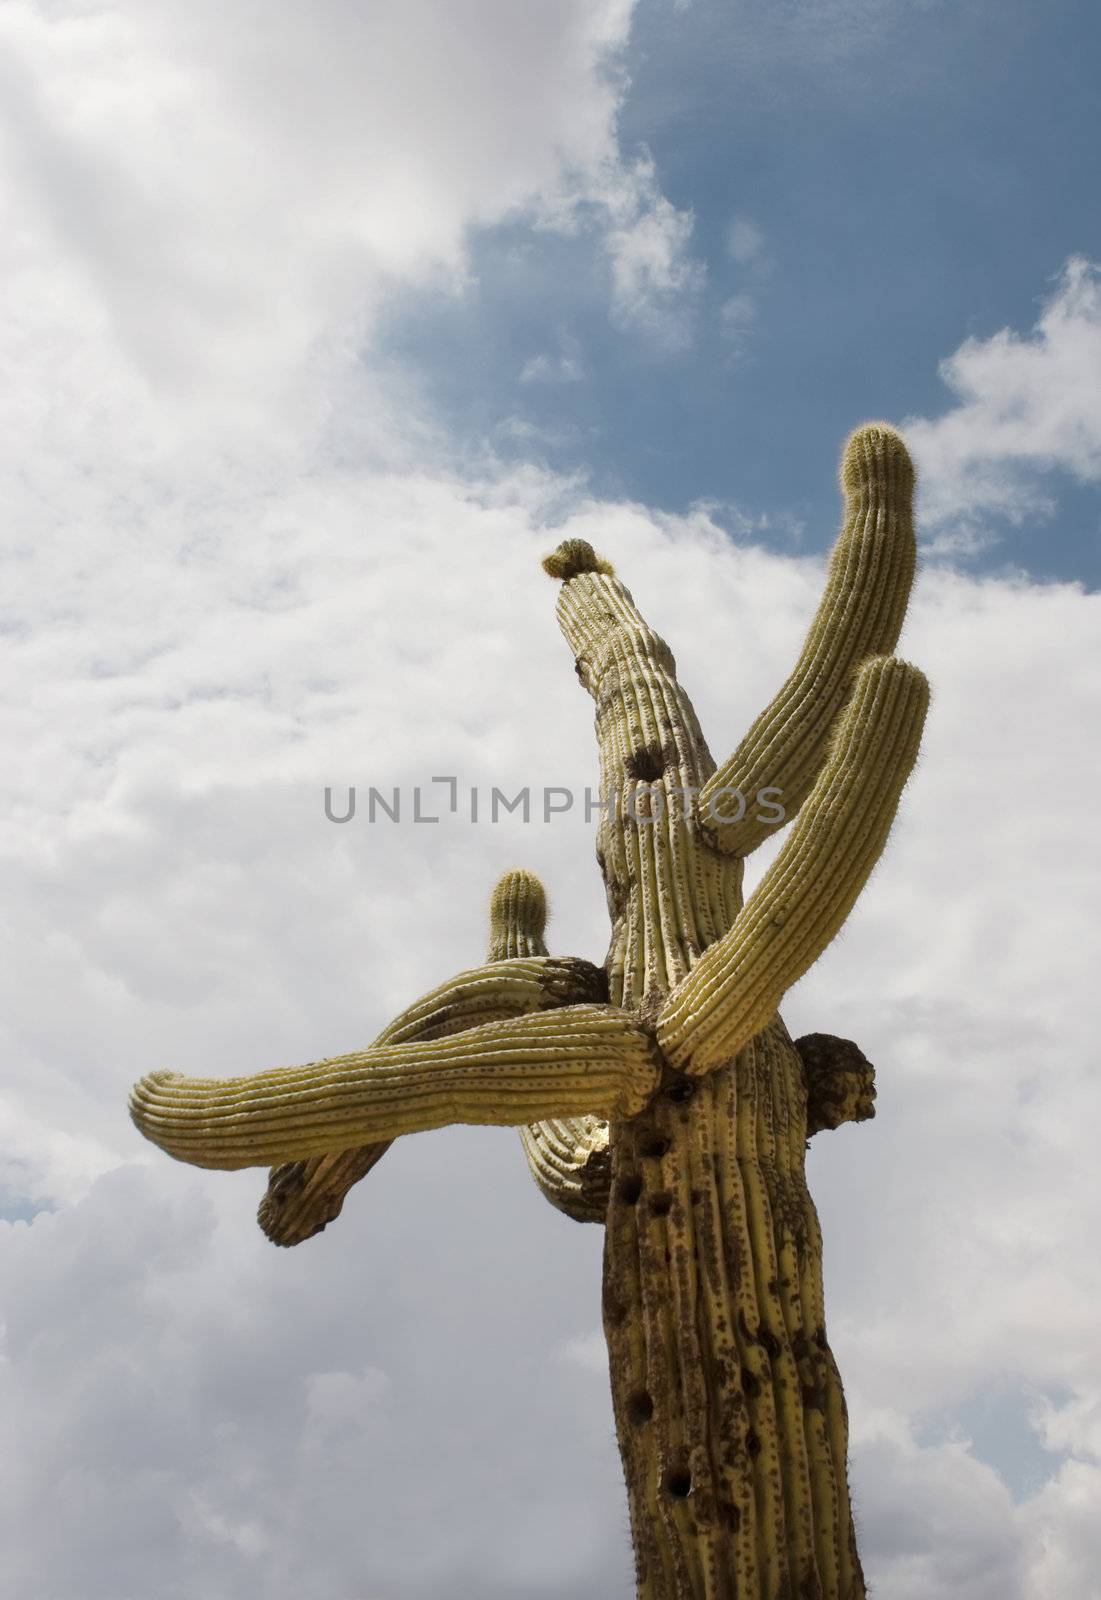 Saguaro cactus standing against a cloudy afternoon sky.